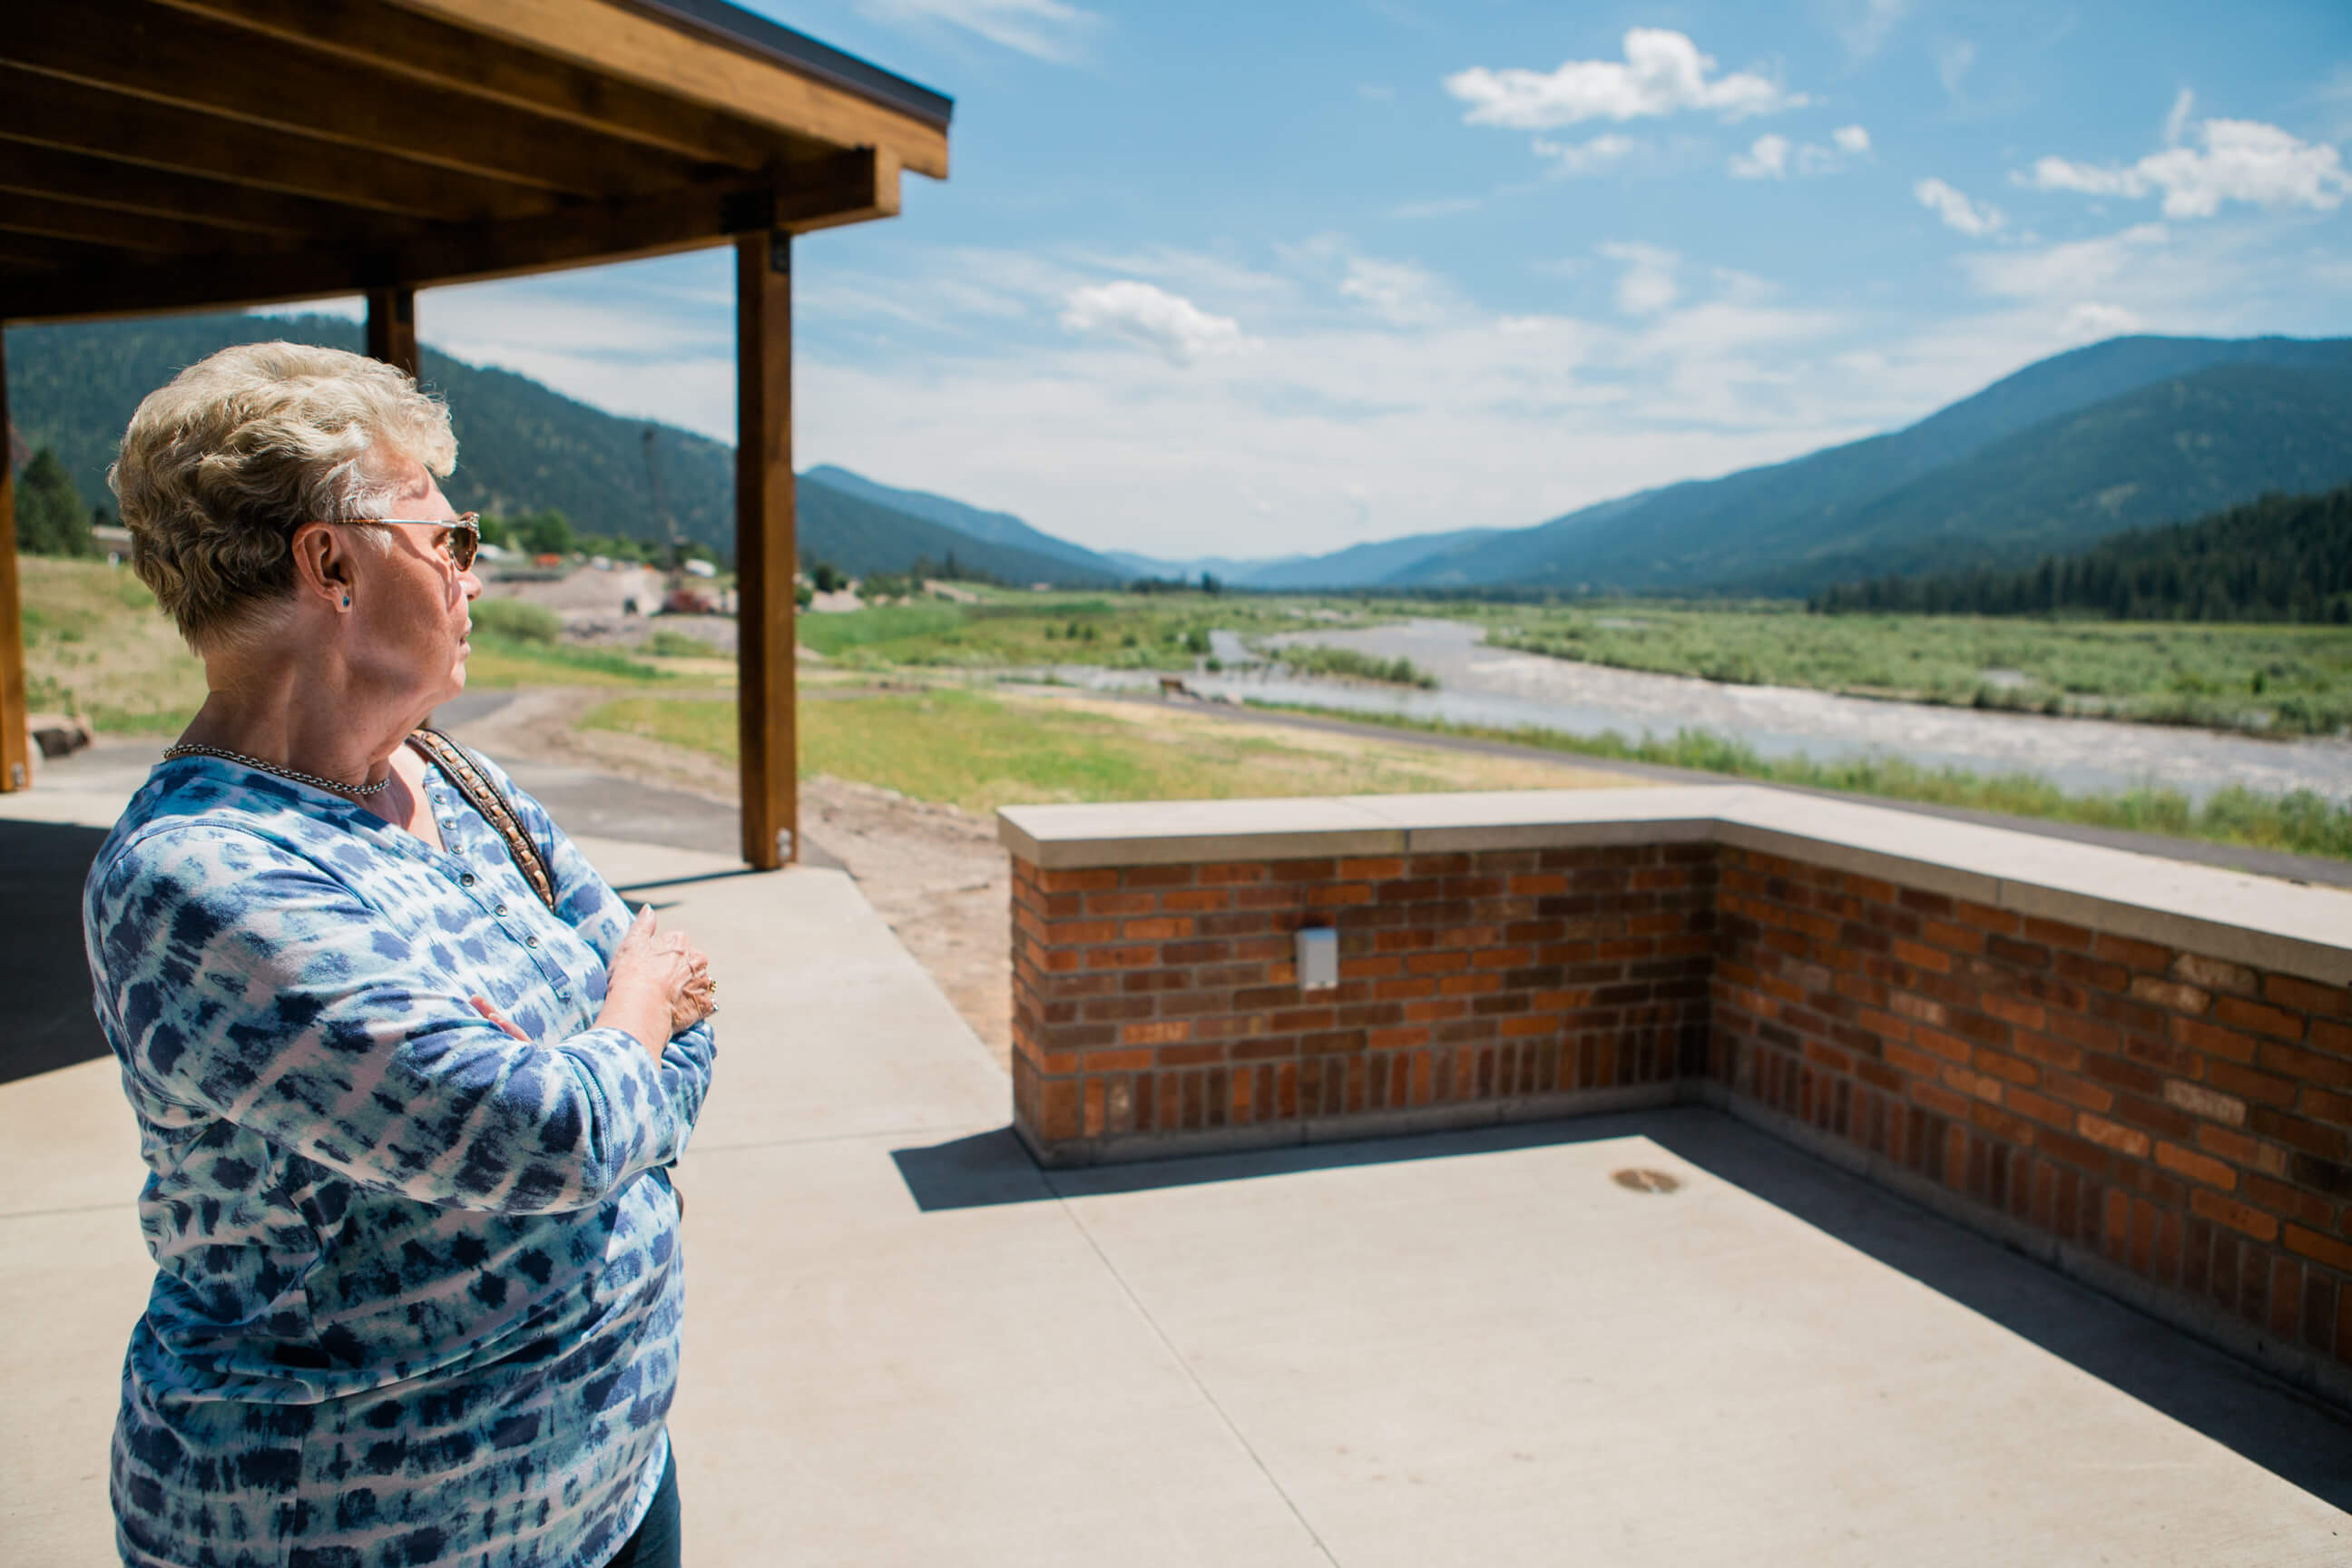 A woman looks out over a flood plain and mountains at Milltown State Park in Montana